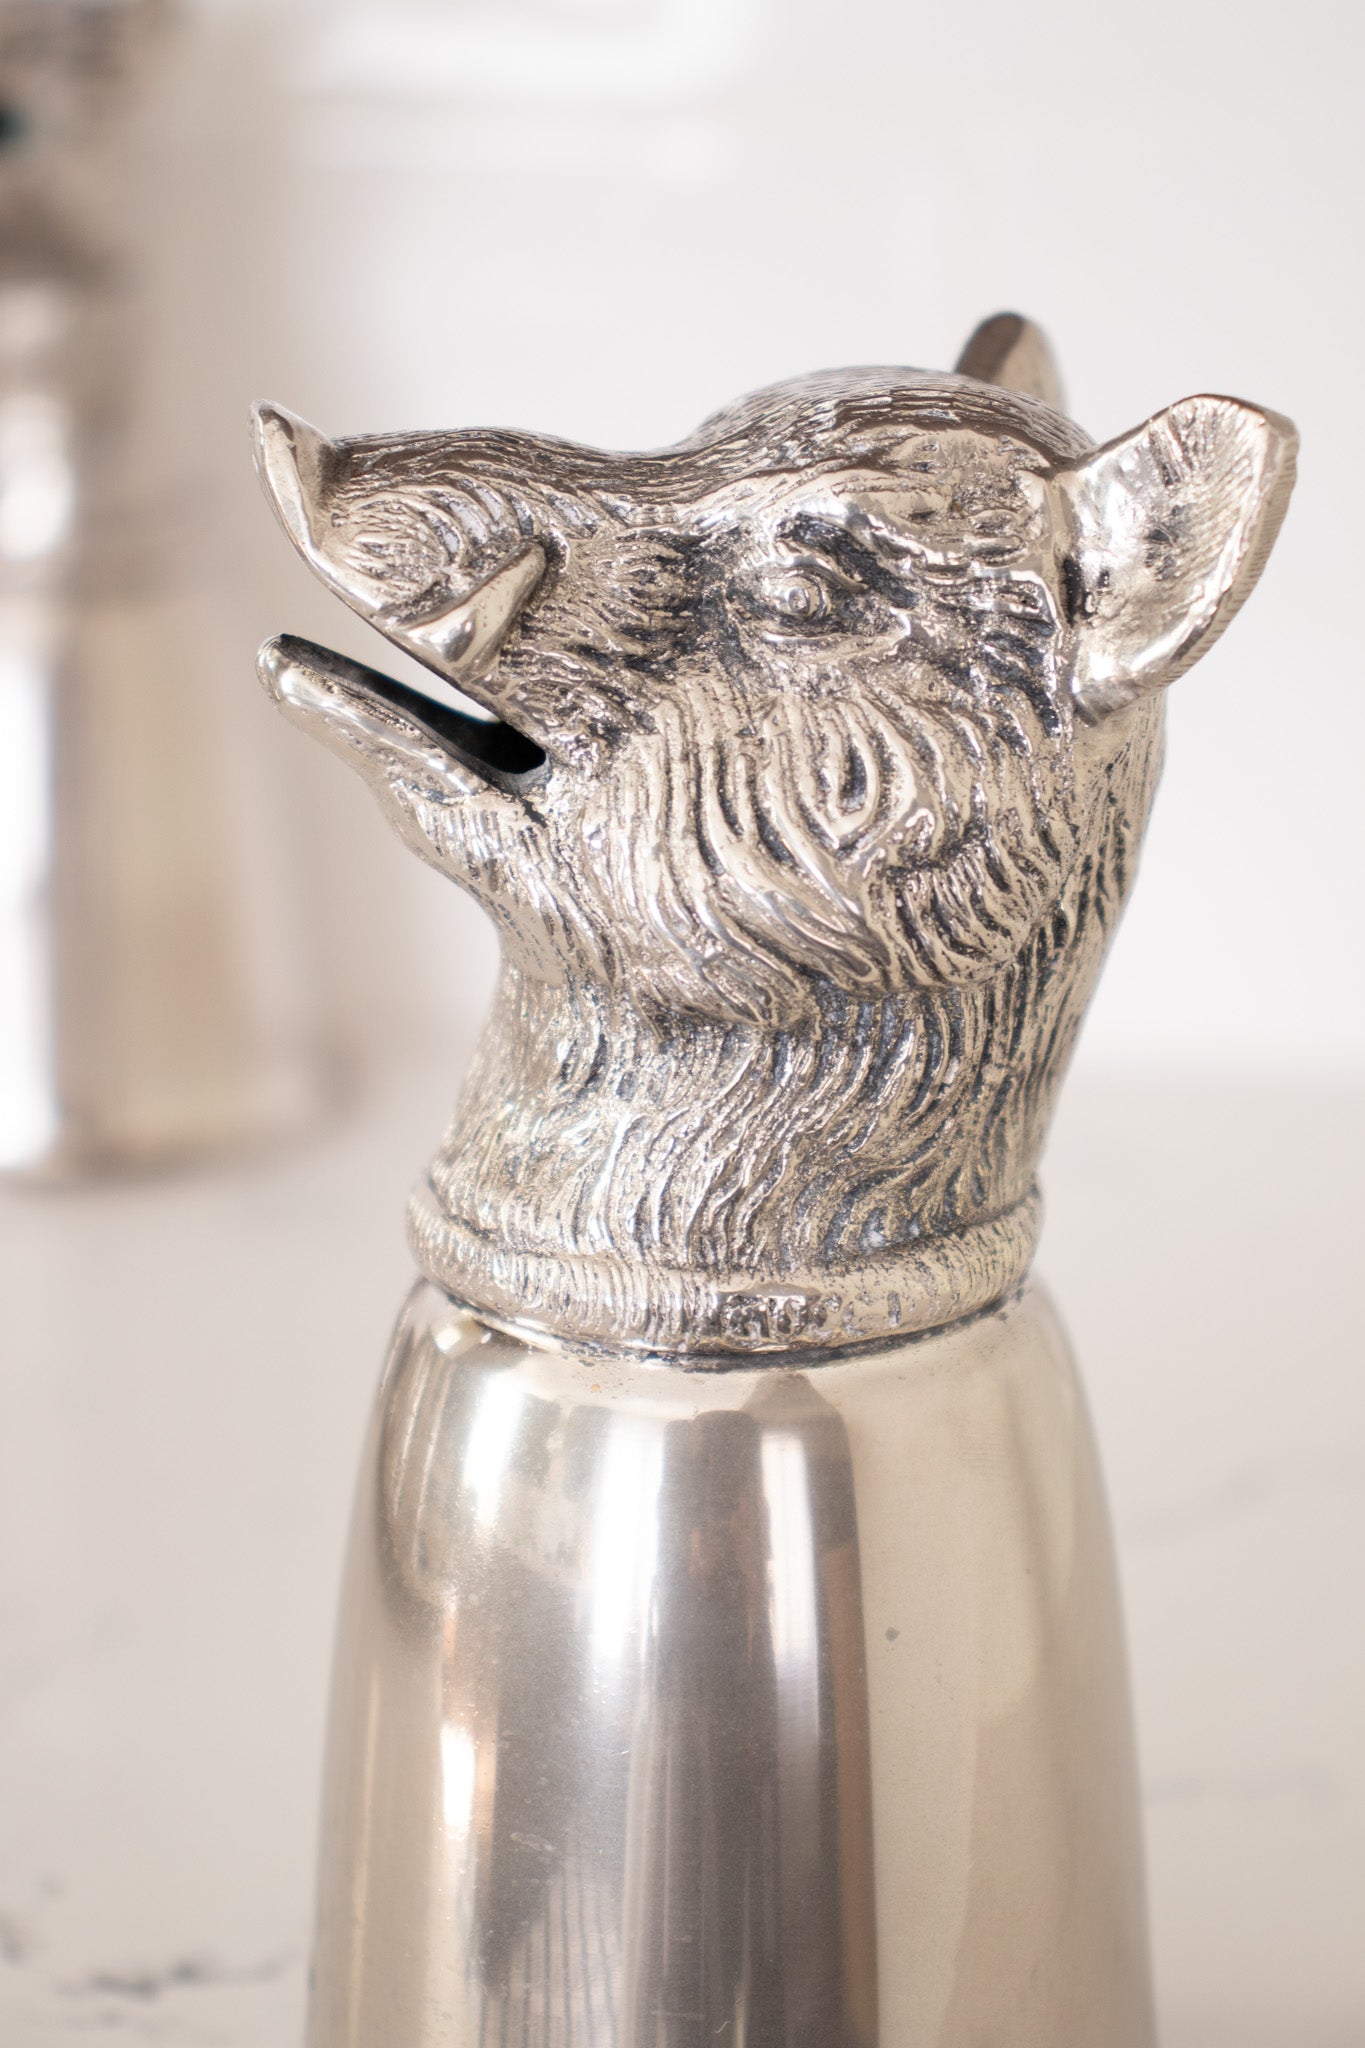 Vintage Gucci 6 Silver Hunting Animal Stirrup Cups & Tray Set boar at Recess Home Los Angeles